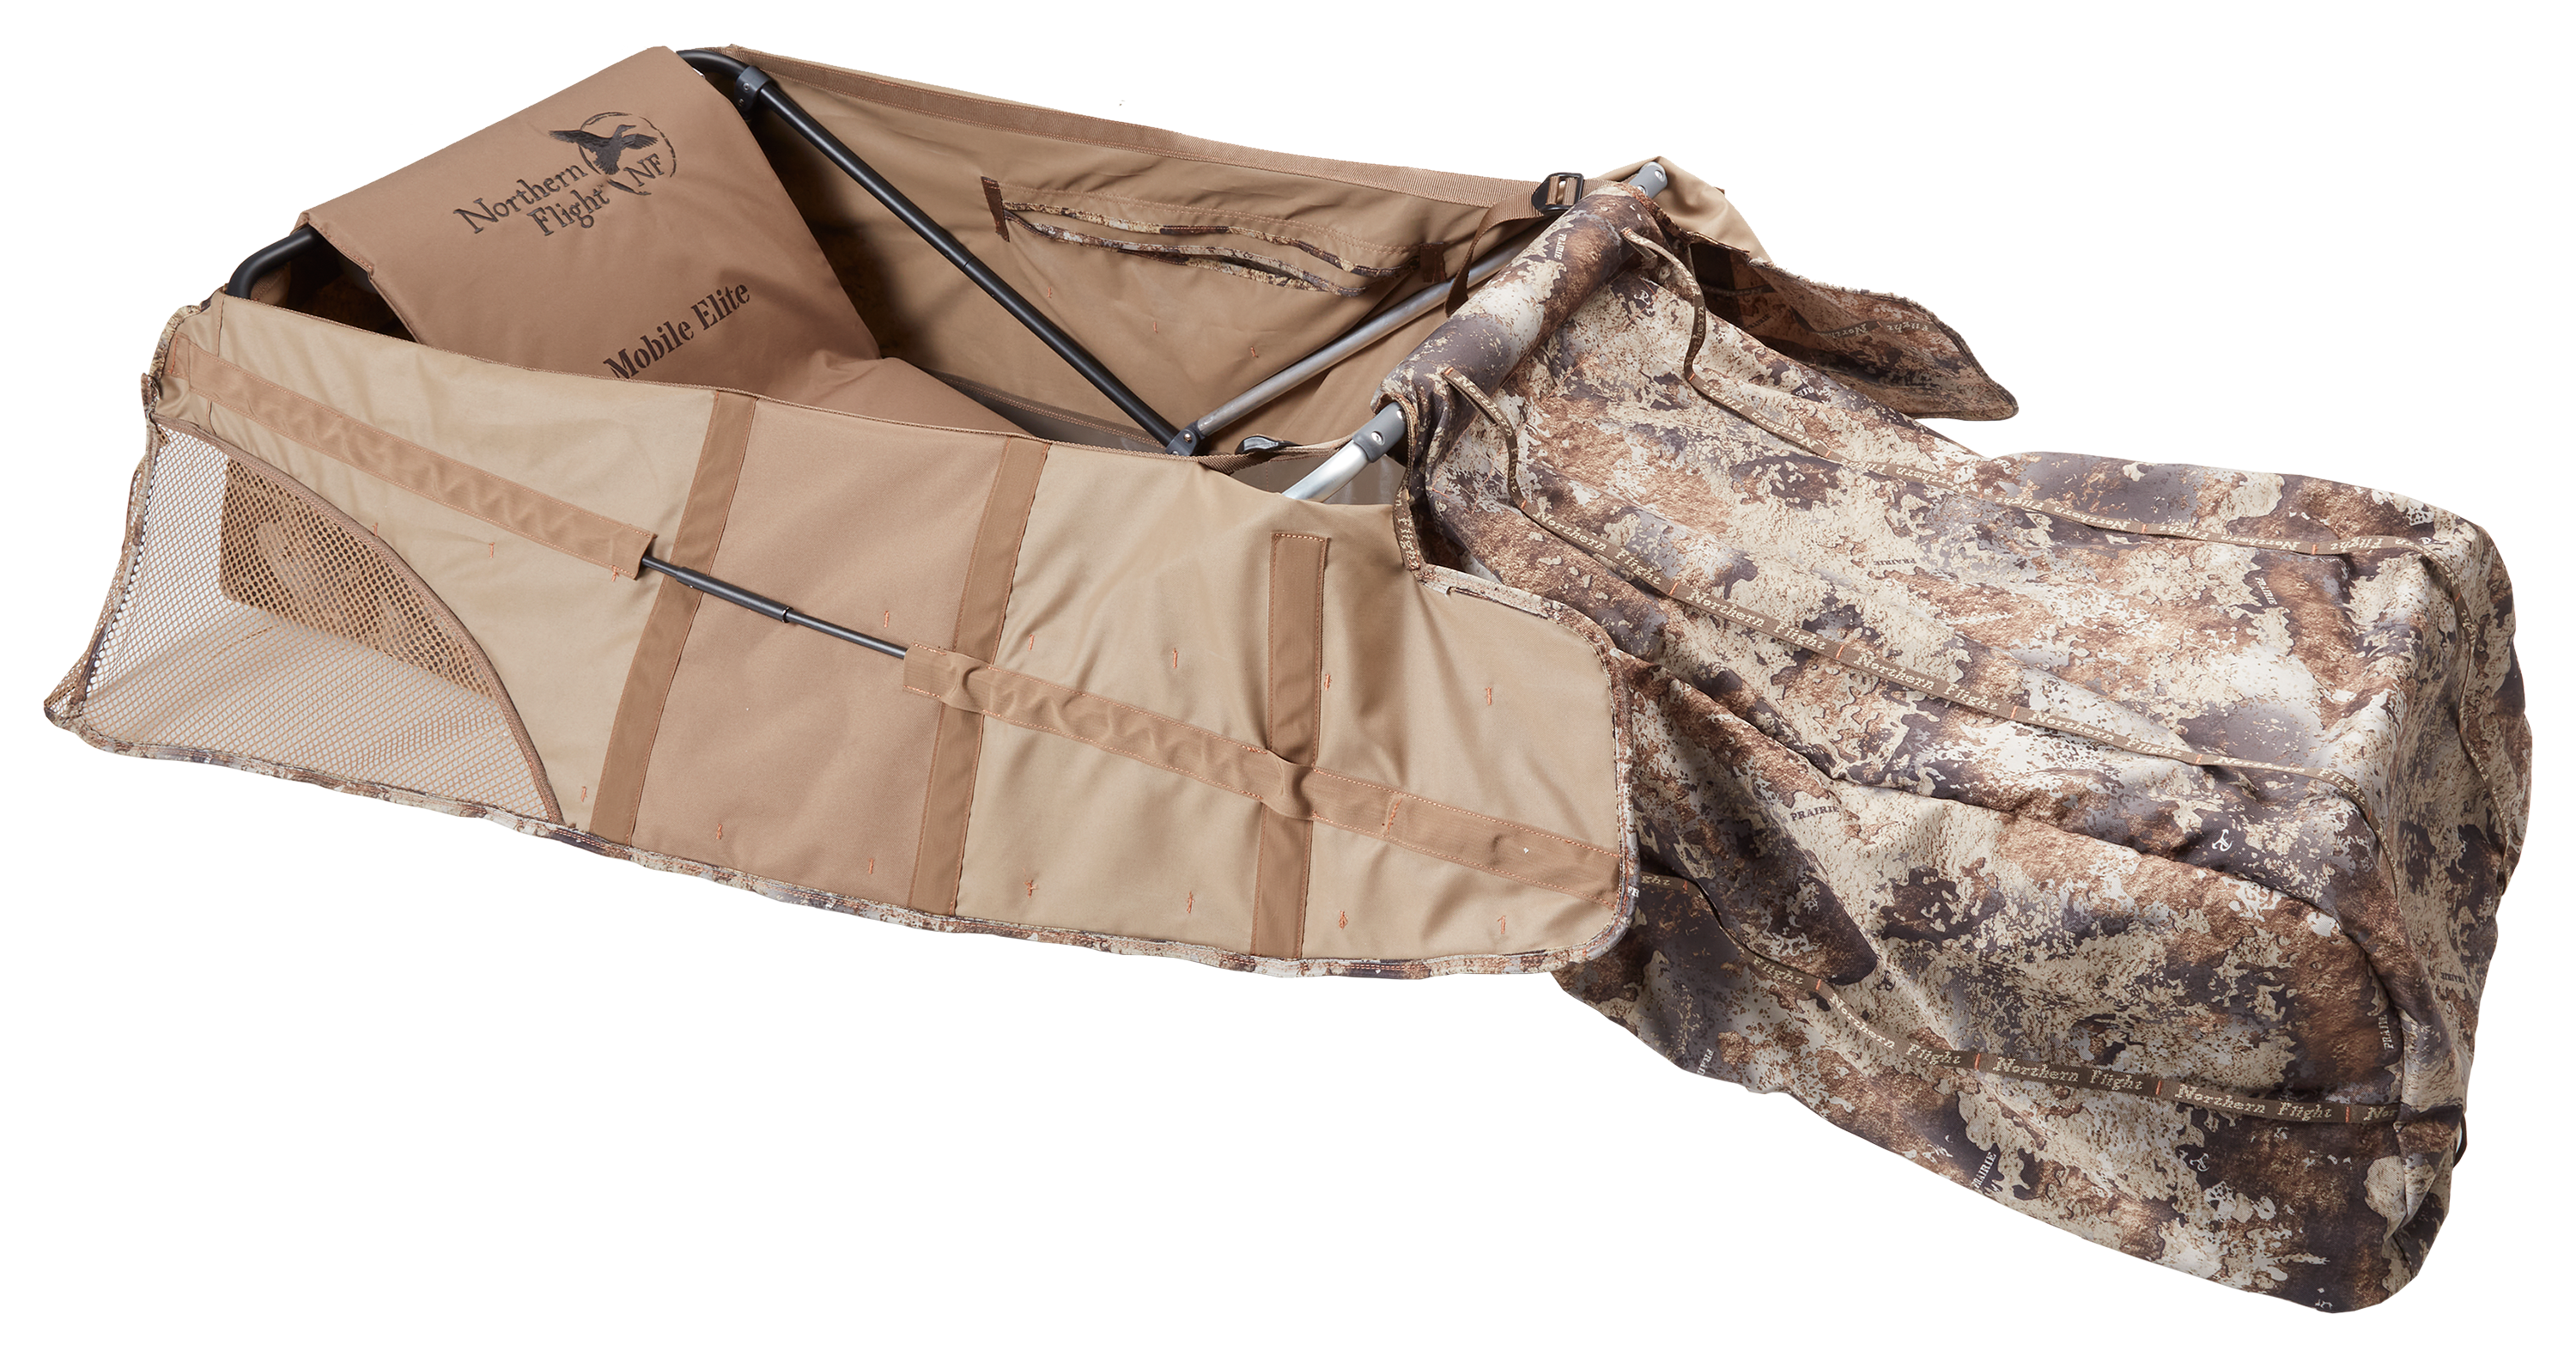 Momarsh Blind Grass Bundle Packs|Perfect for Concealment for Waterfowl  Hunting